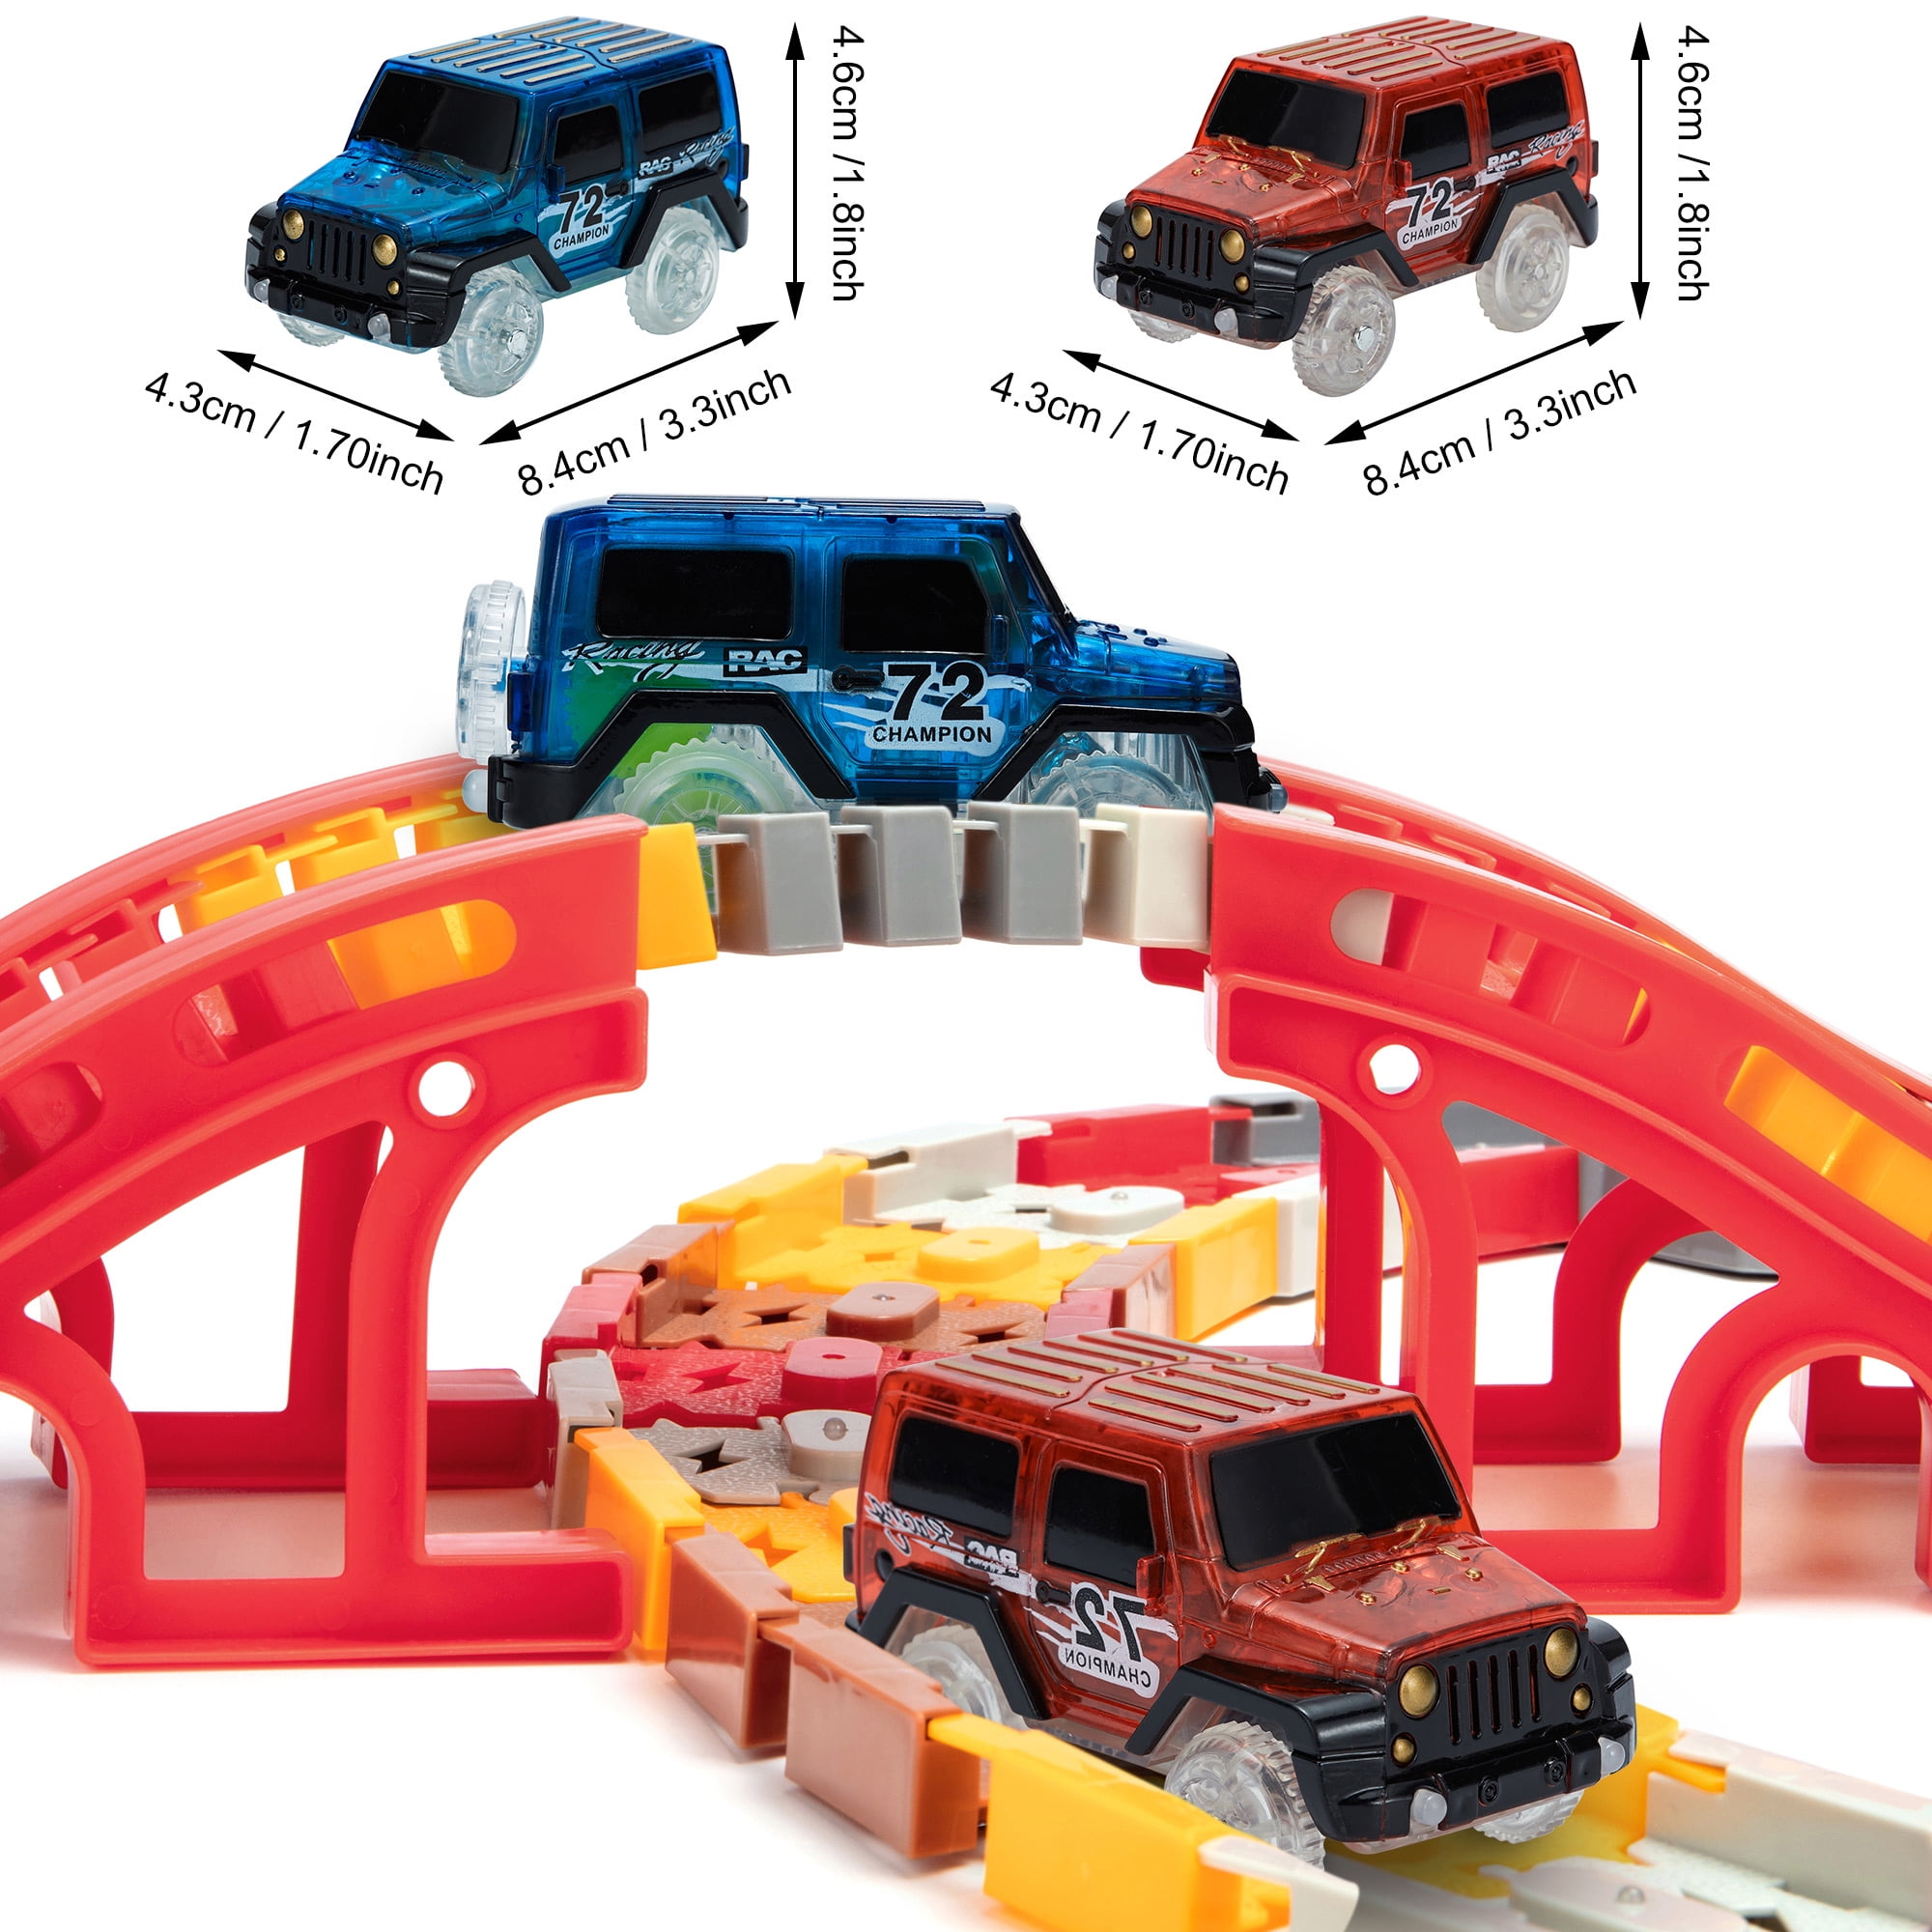 Race Car Track Accessories with LED Flashing Lights,Compatible with Most Tracks Playset for Kids Glow in The Dark 3Pack Track Cars Tracks Cars Replacement only,Additional Toy Car for RaceTracks 